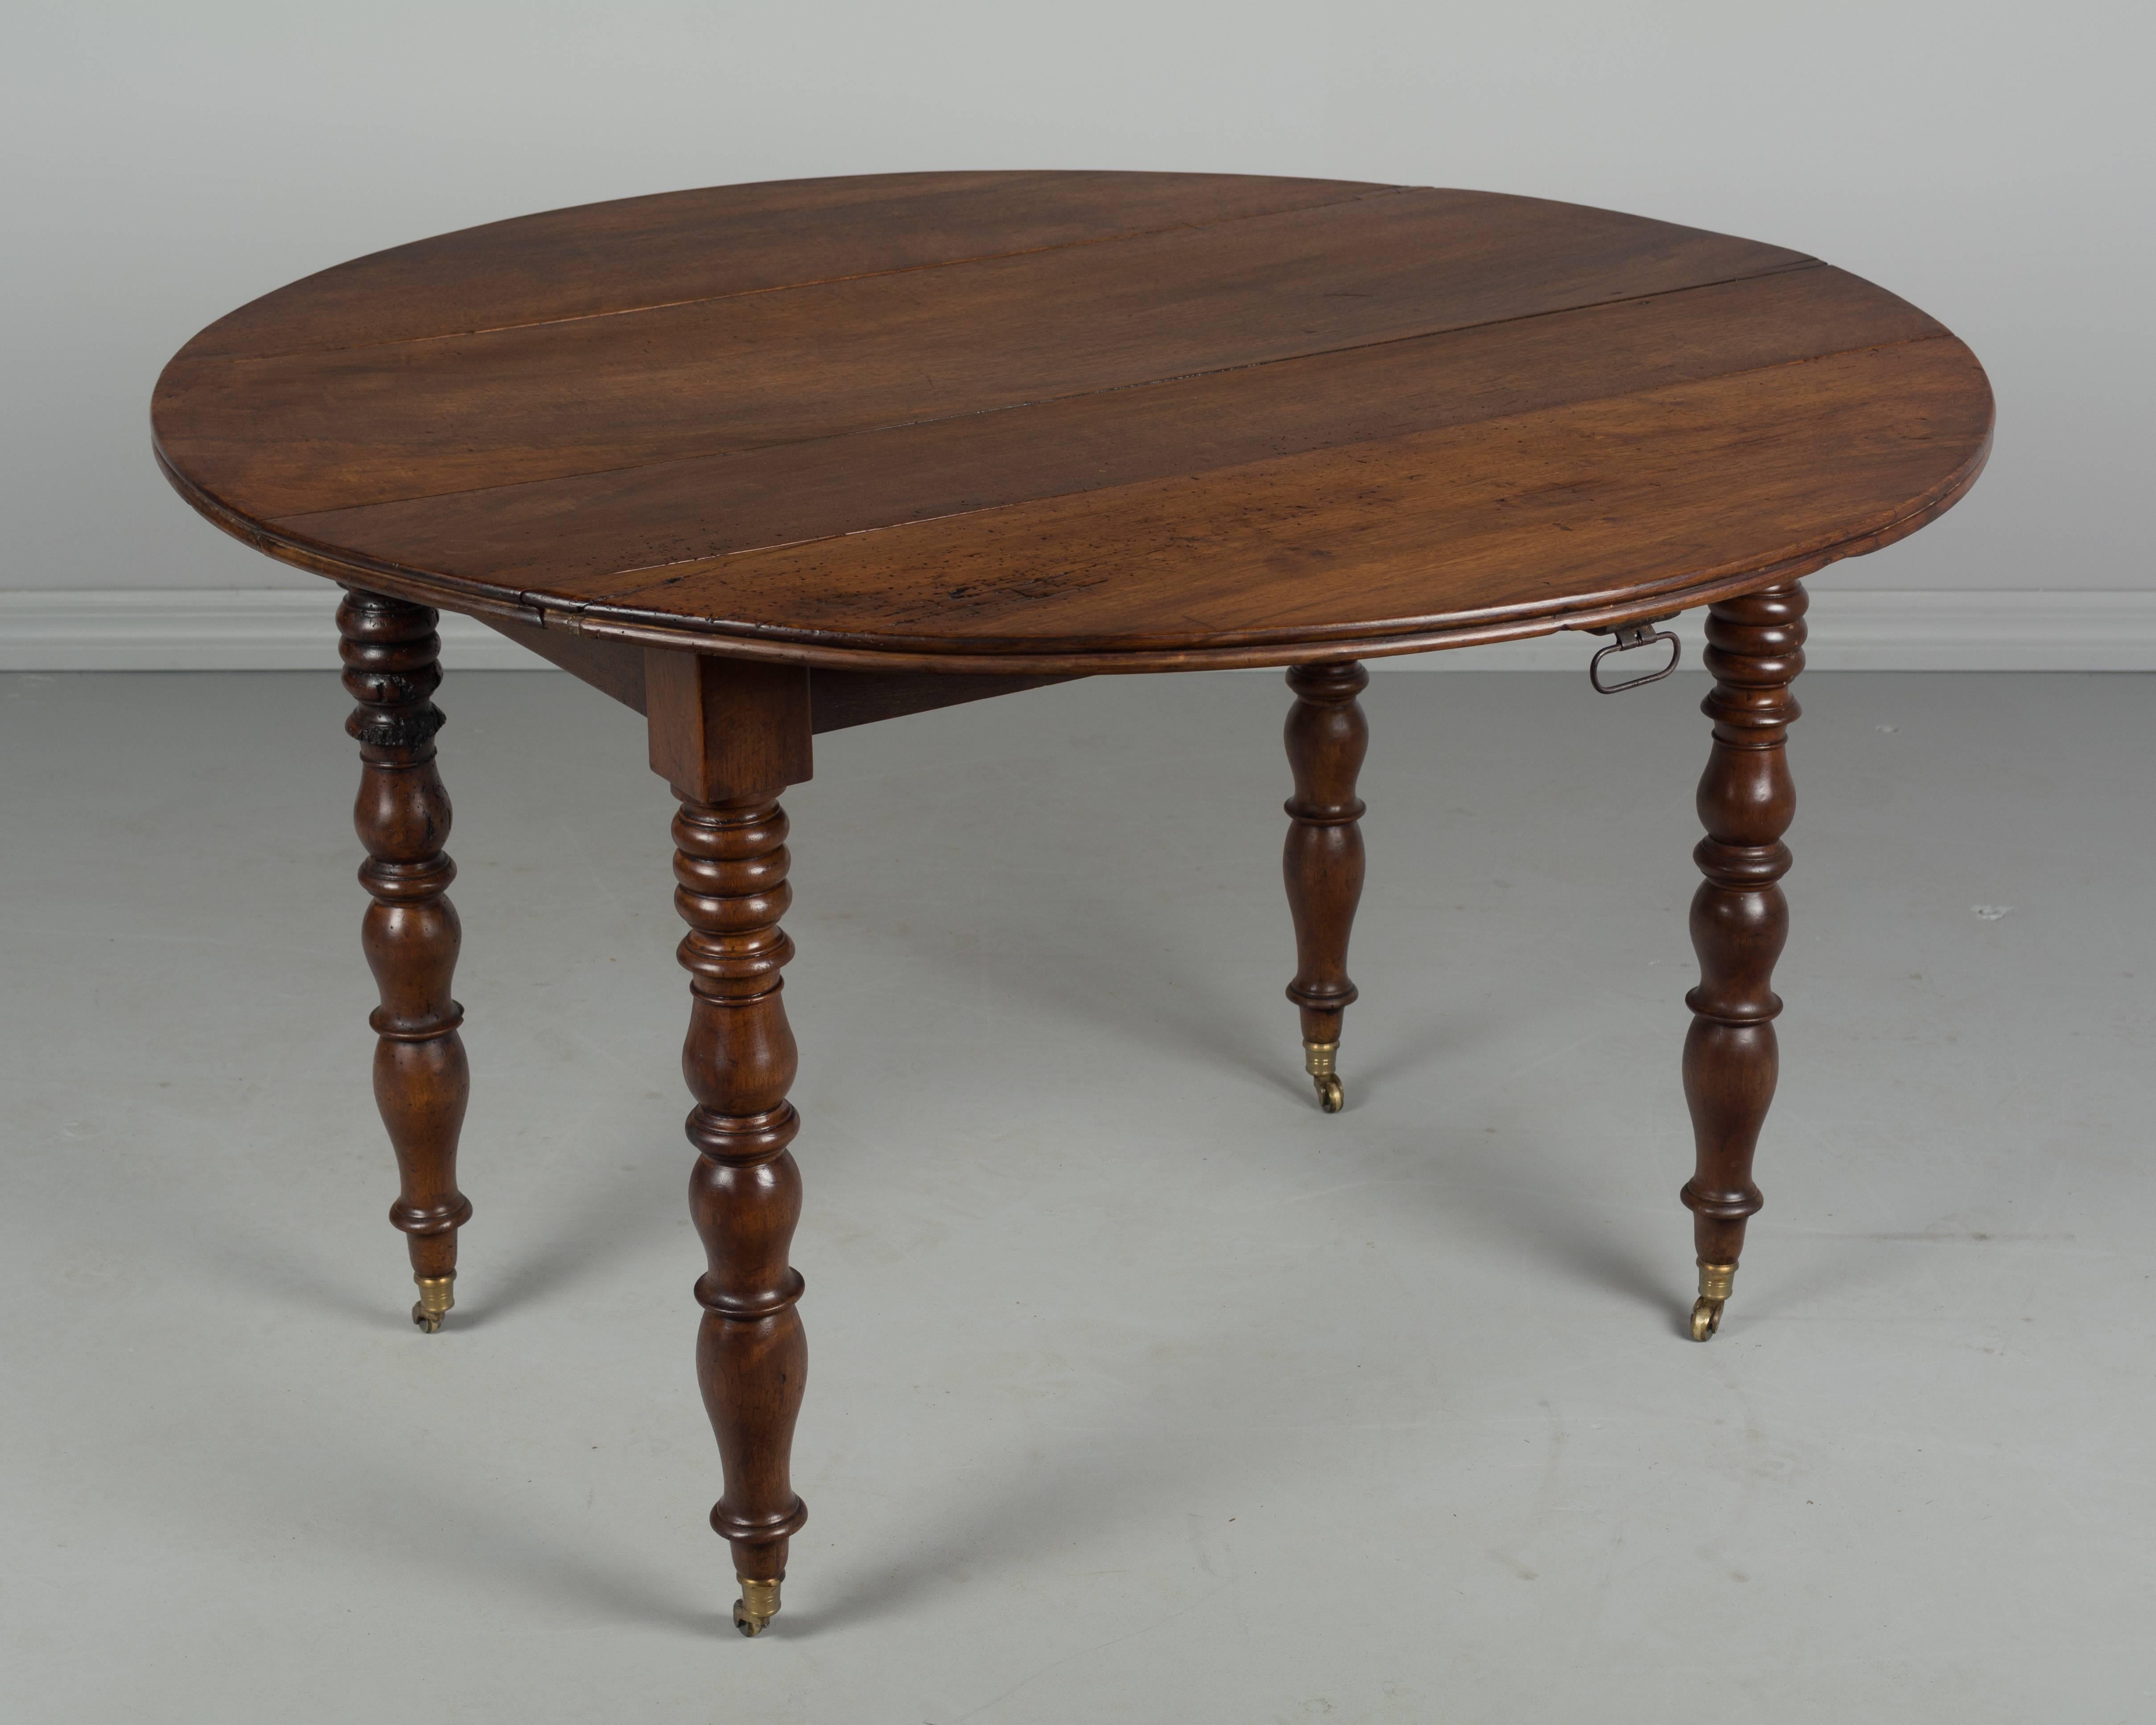 A 19th century French Louis Philippe drop-leaf table made of solid walnut. Turned legs with new brass wheels. Excellent quality. Beautiful wood grain with waxed finish. When closed the table is 22.5